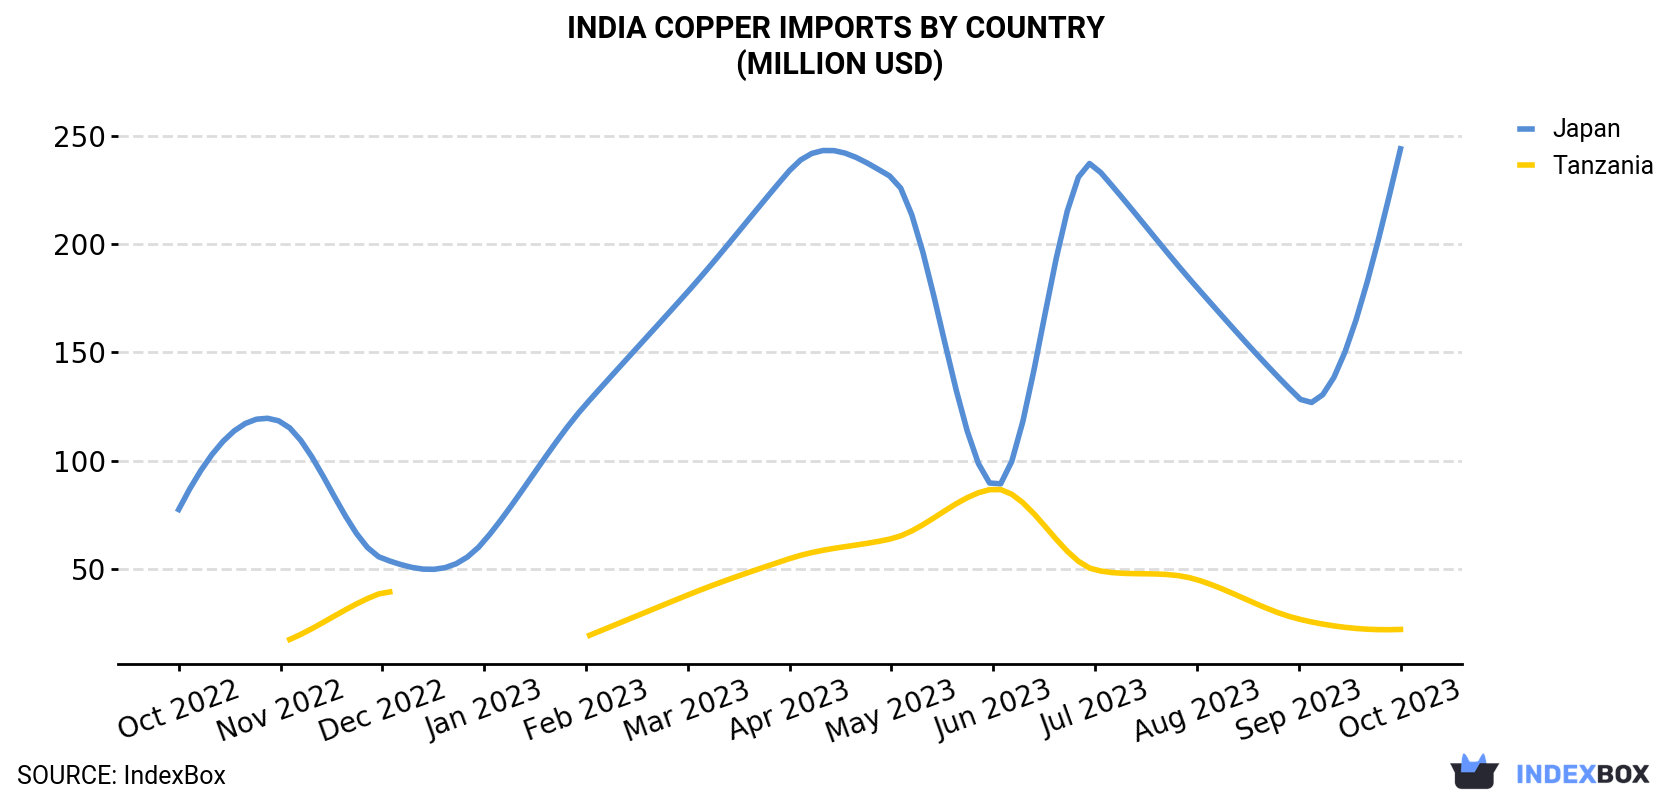 India Copper Imports By Country (Million USD)